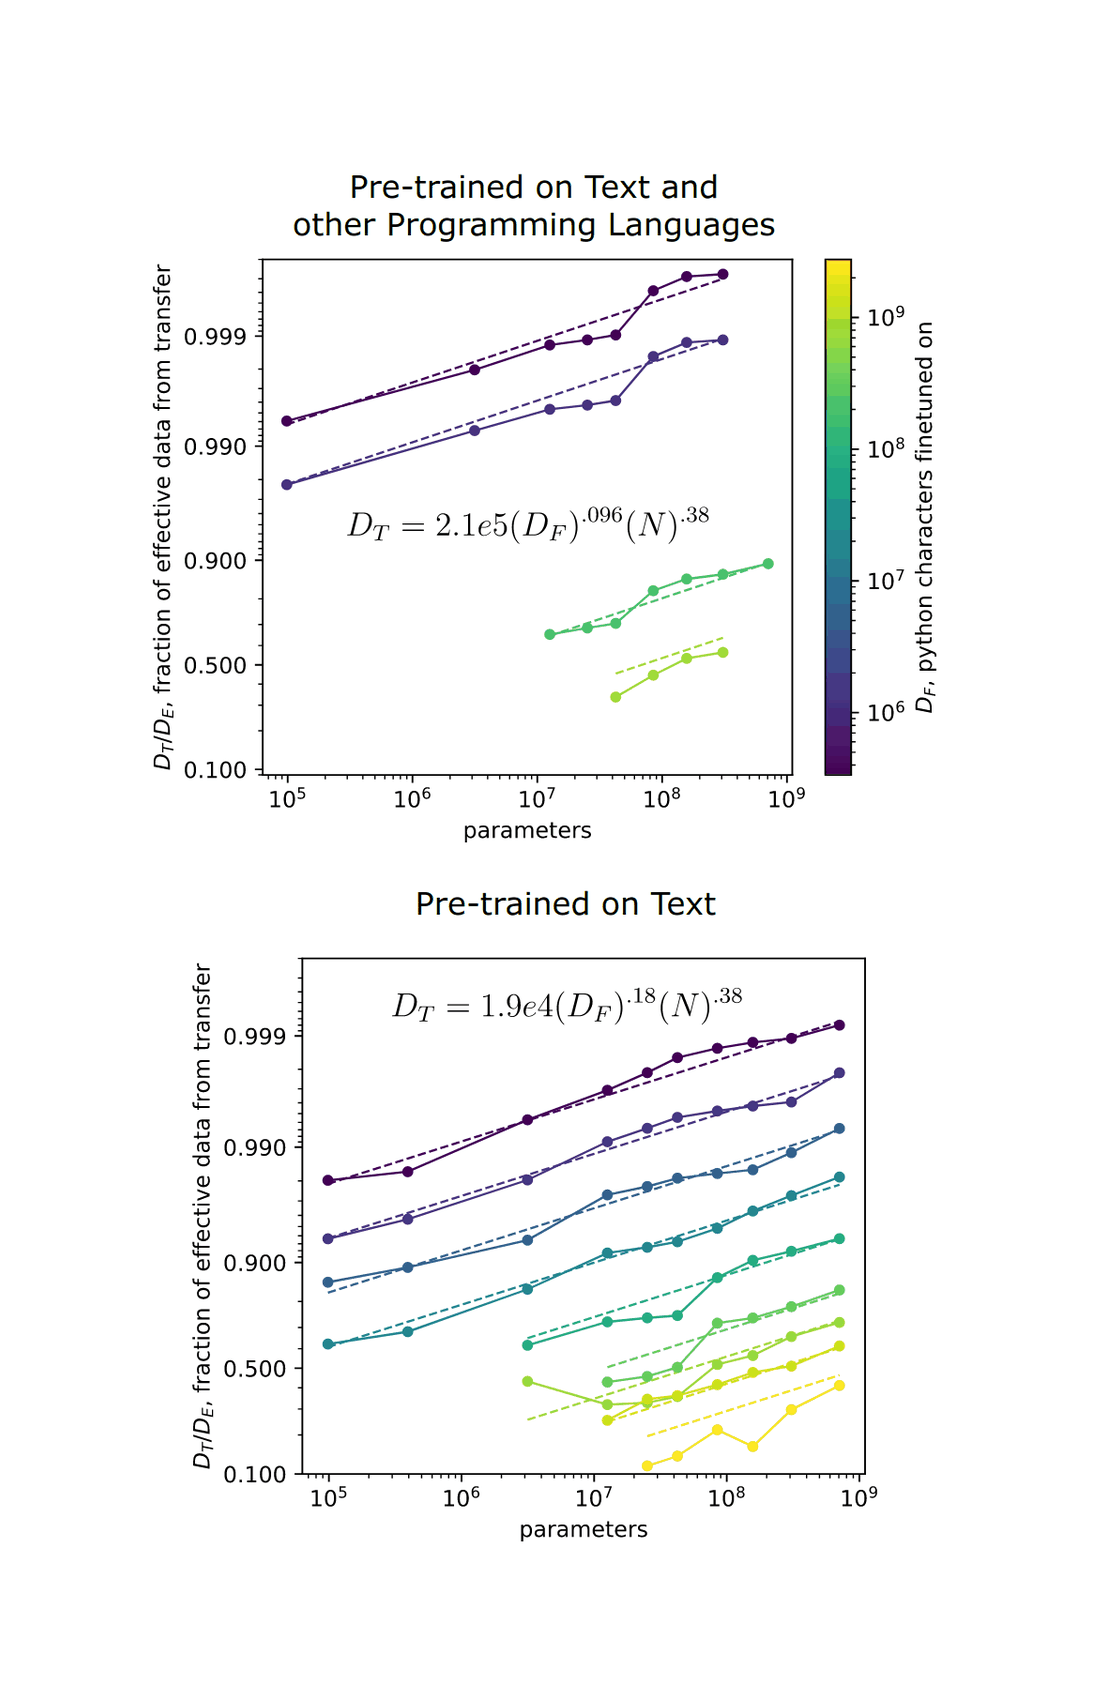 Figure 2: In the low-data regime, we observe a good fit for over 4 orders of magnitude in model size and 3 orders of magnitude in fine-tuning dataset size. The fit equation is shown above in terms of DT for simplicity, but the fractional form is given by equation B.2. We show the omitted high data regime points in Appendix D. Details for the approach used to generate these fits are shown in Appendix C.